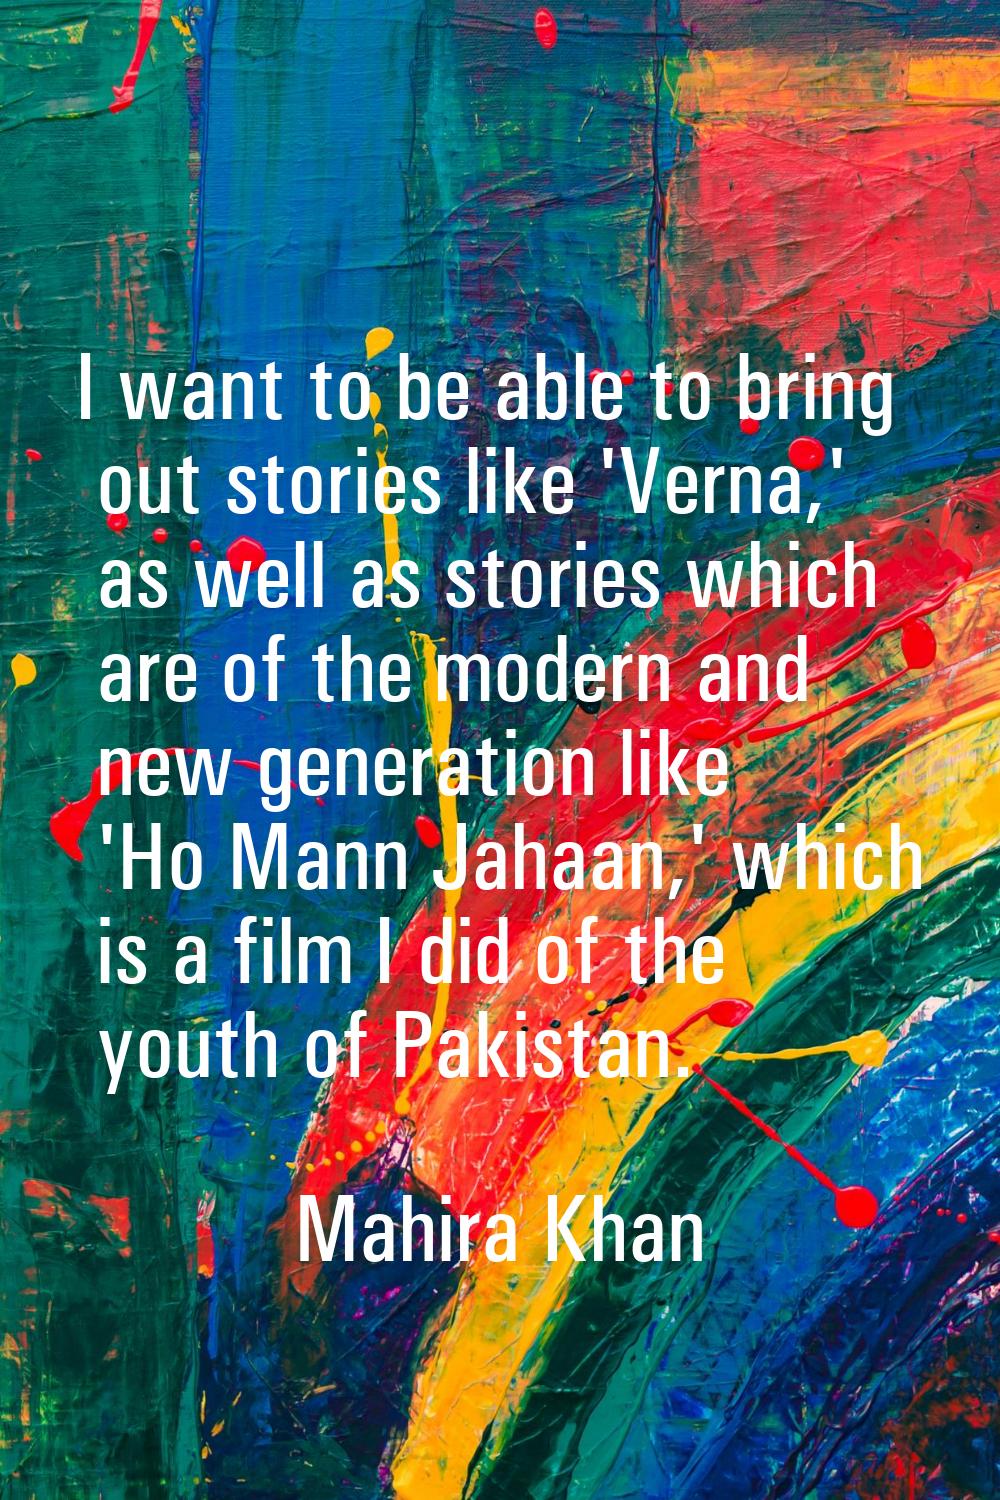 I want to be able to bring out stories like 'Verna,' as well as stories which are of the modern and